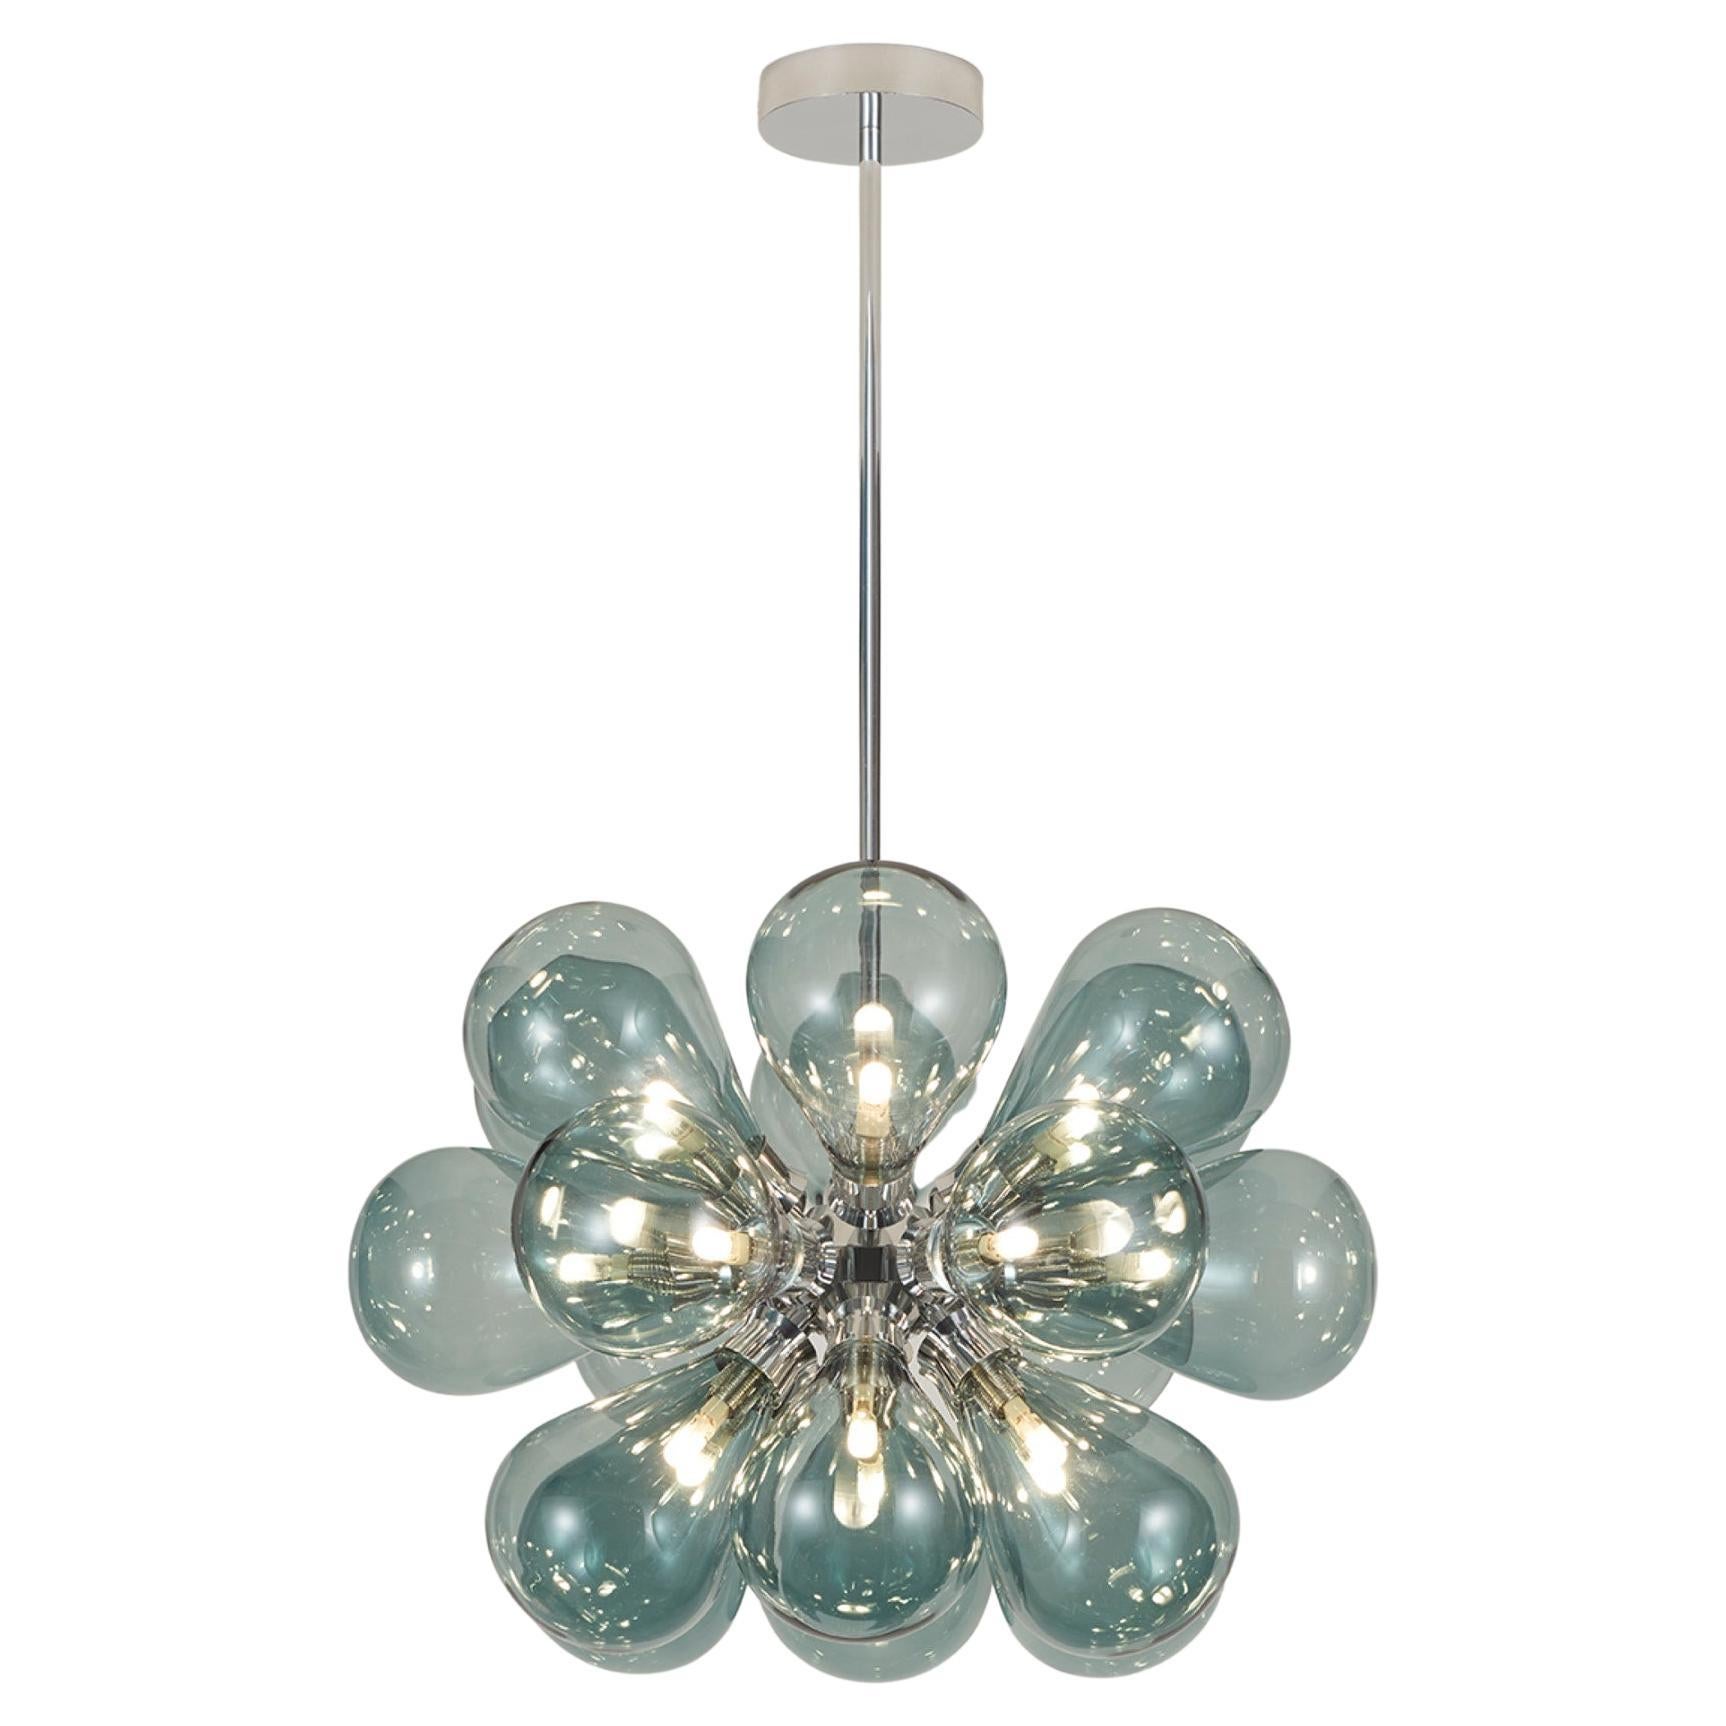 Cintola Maxi Pendant in Polished Aluminium with 18 Smoke Grey Handblown Globes For Sale